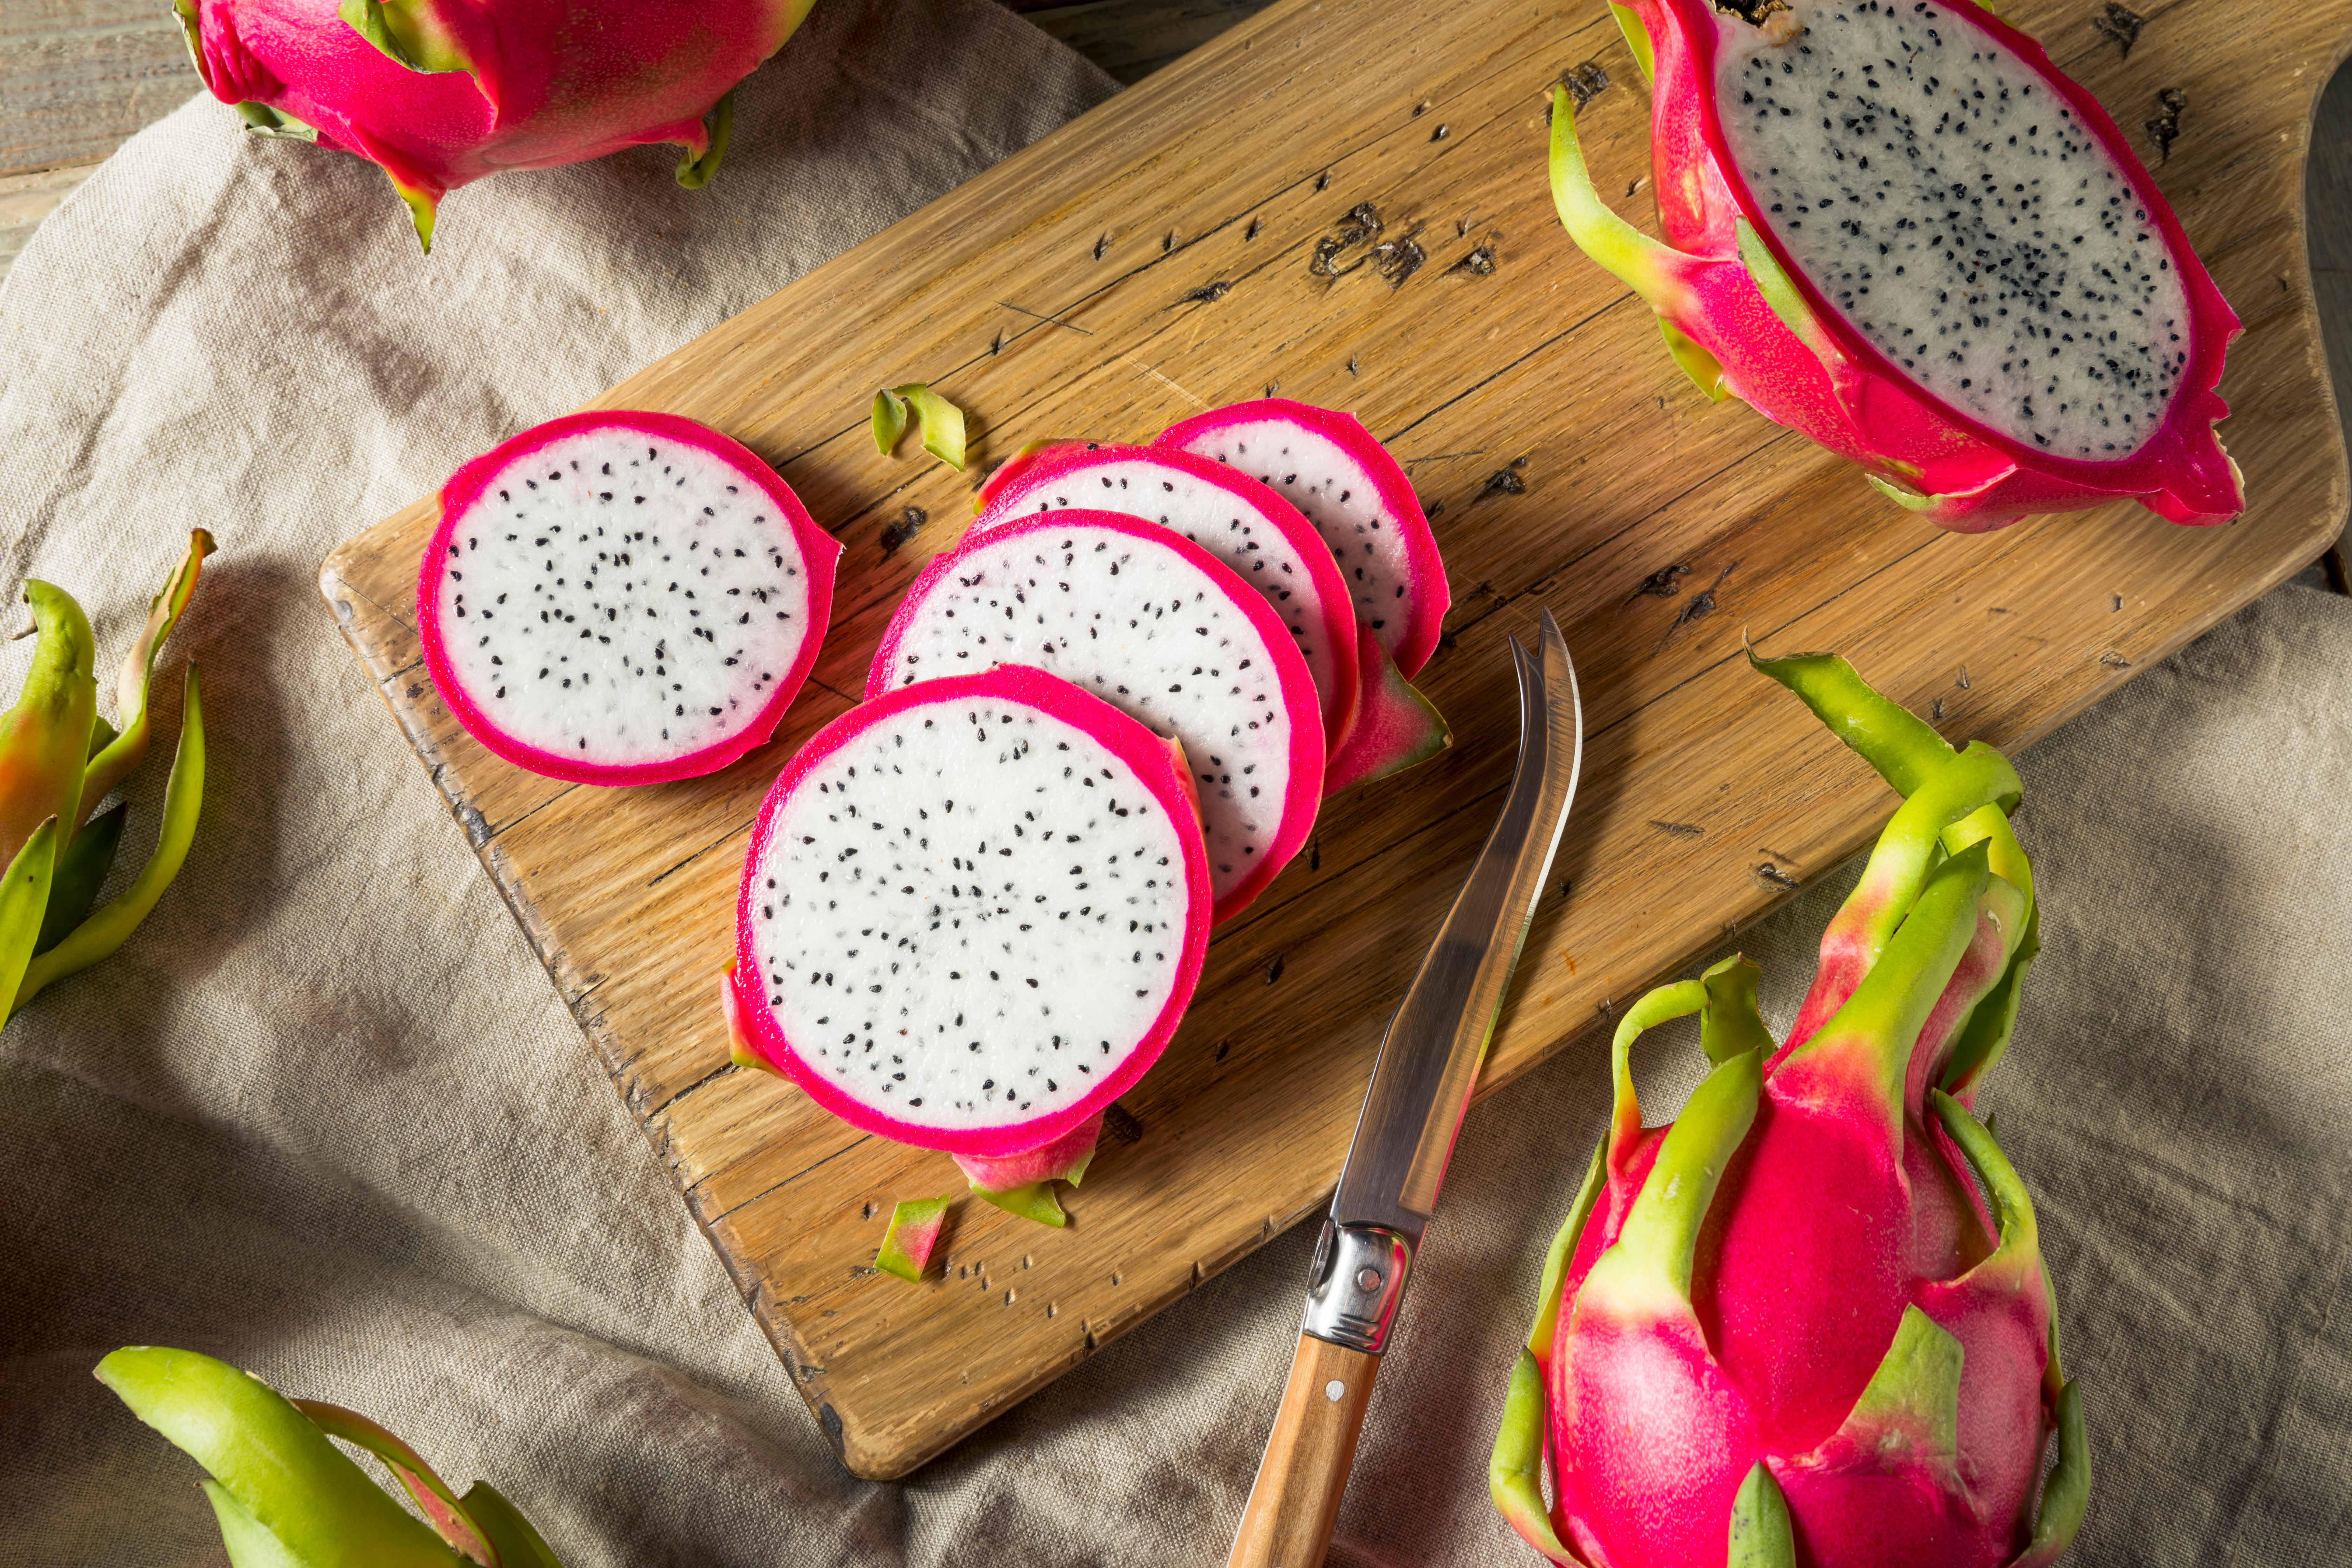 Dragon Fruit 9 Health Benefits You Need To Know,How Many Shots In A Handle Of Vodka